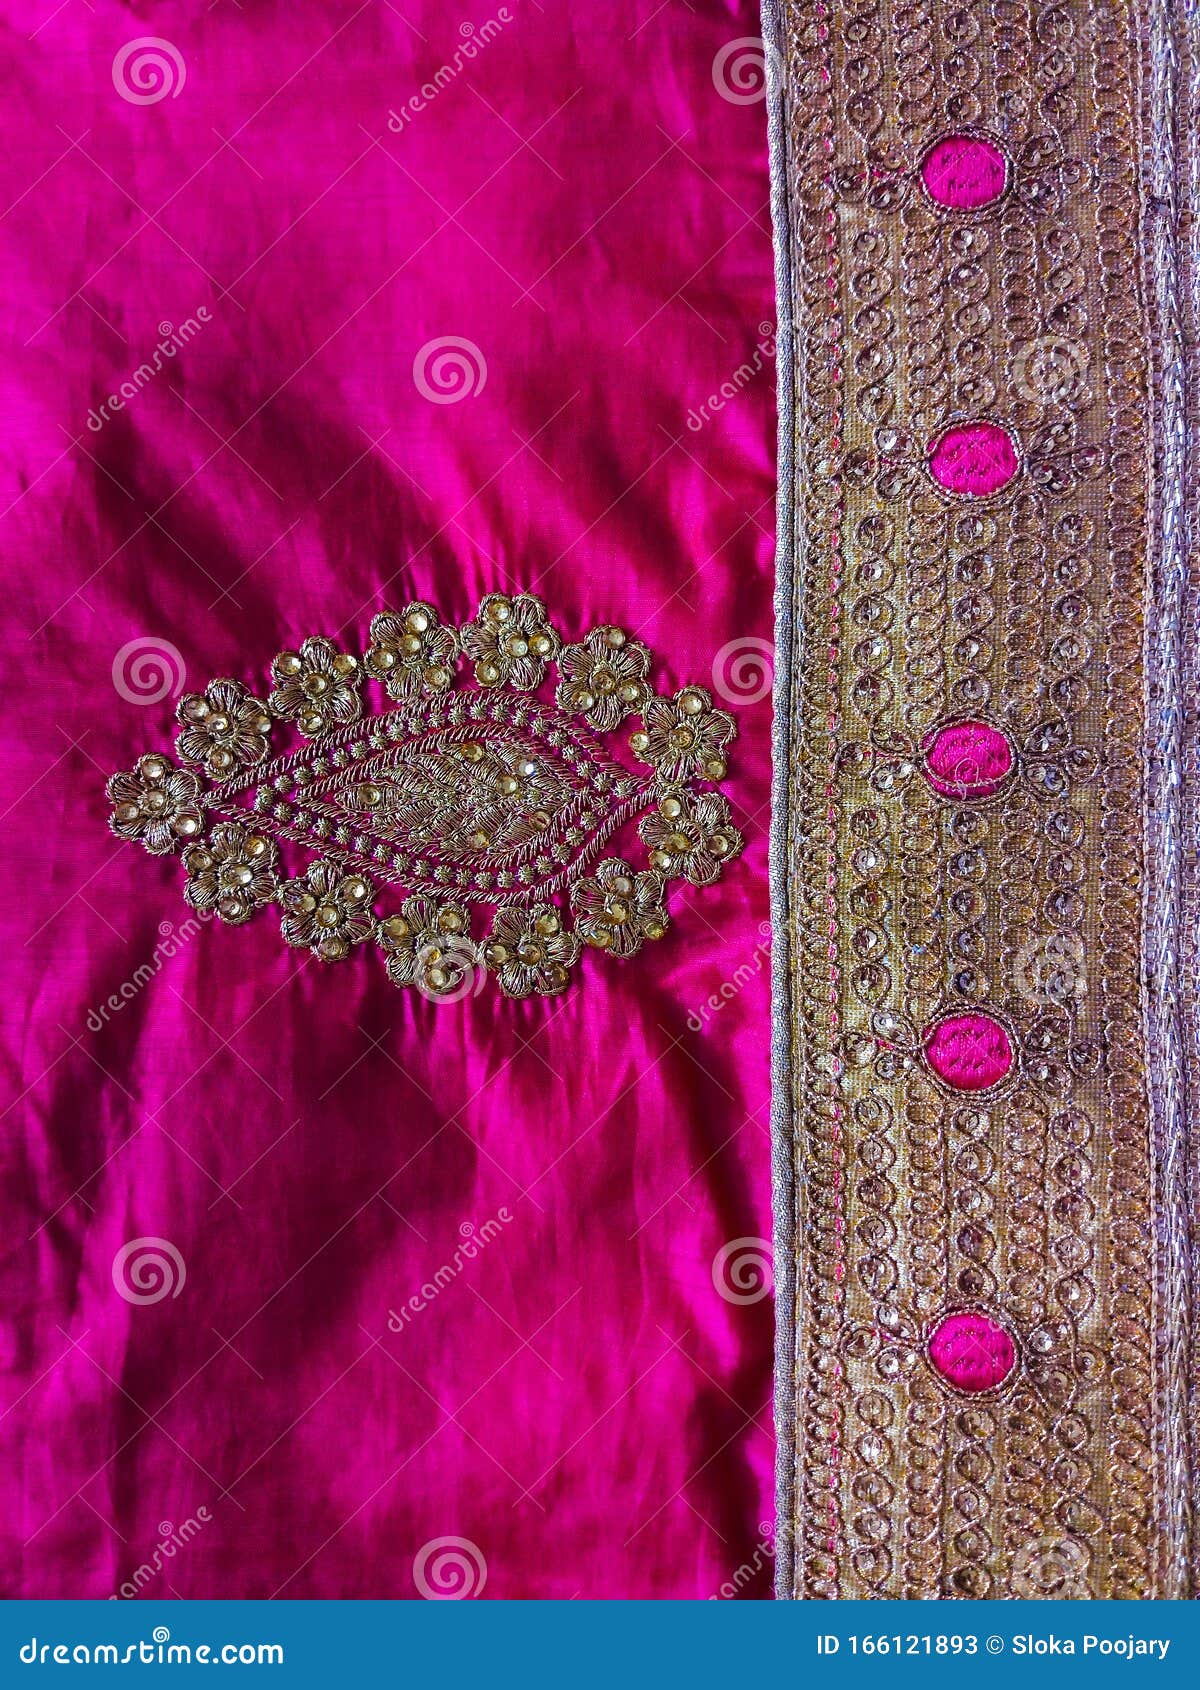 Bright Pink Coloured Border of a Saree with Handmade Beads Design on it  Stock Image - Image of golden, heavy: 166121893